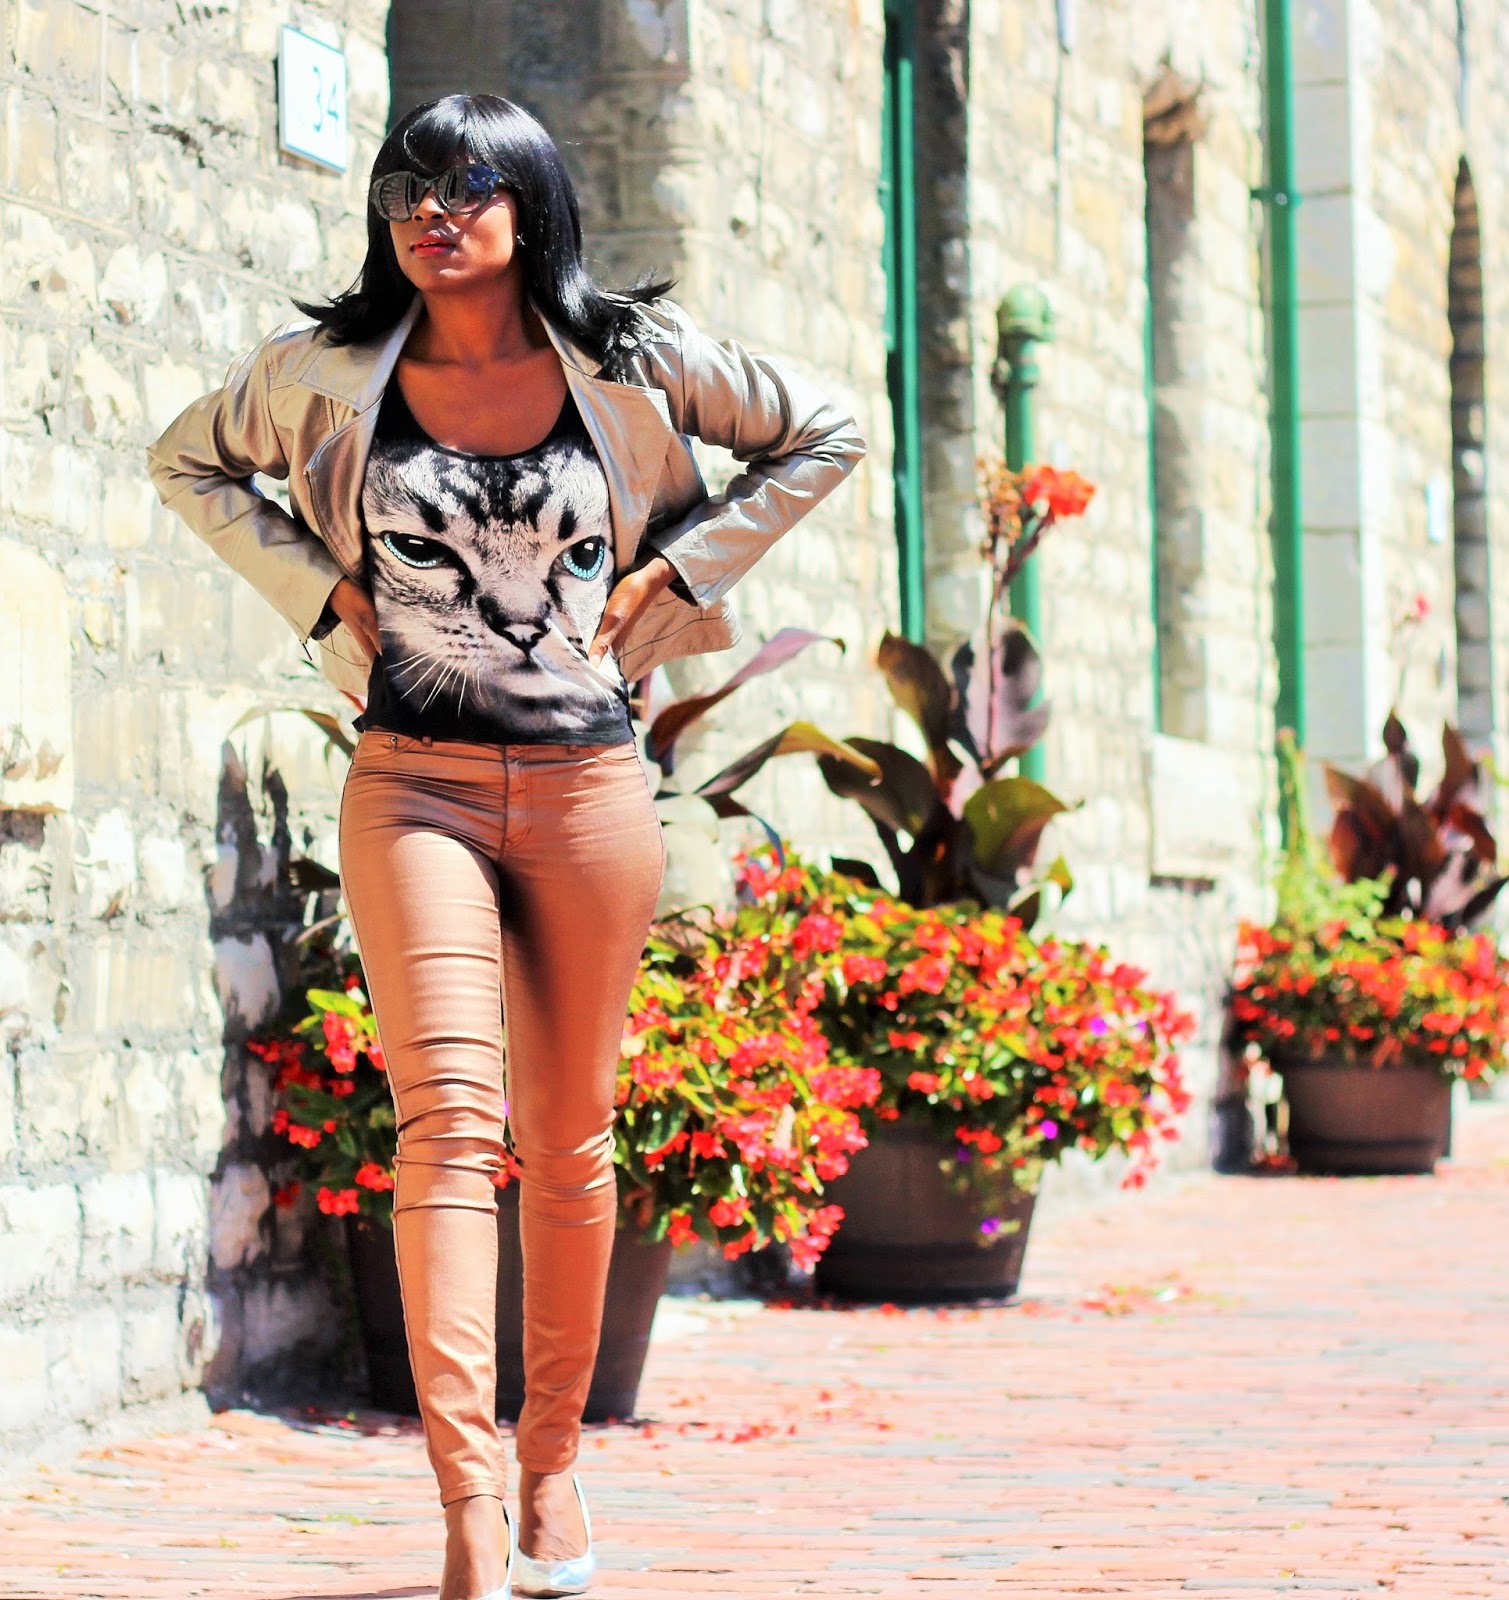 Metallic Gold Jacket Styled With Metallic Gold Pants & A Graphic Top